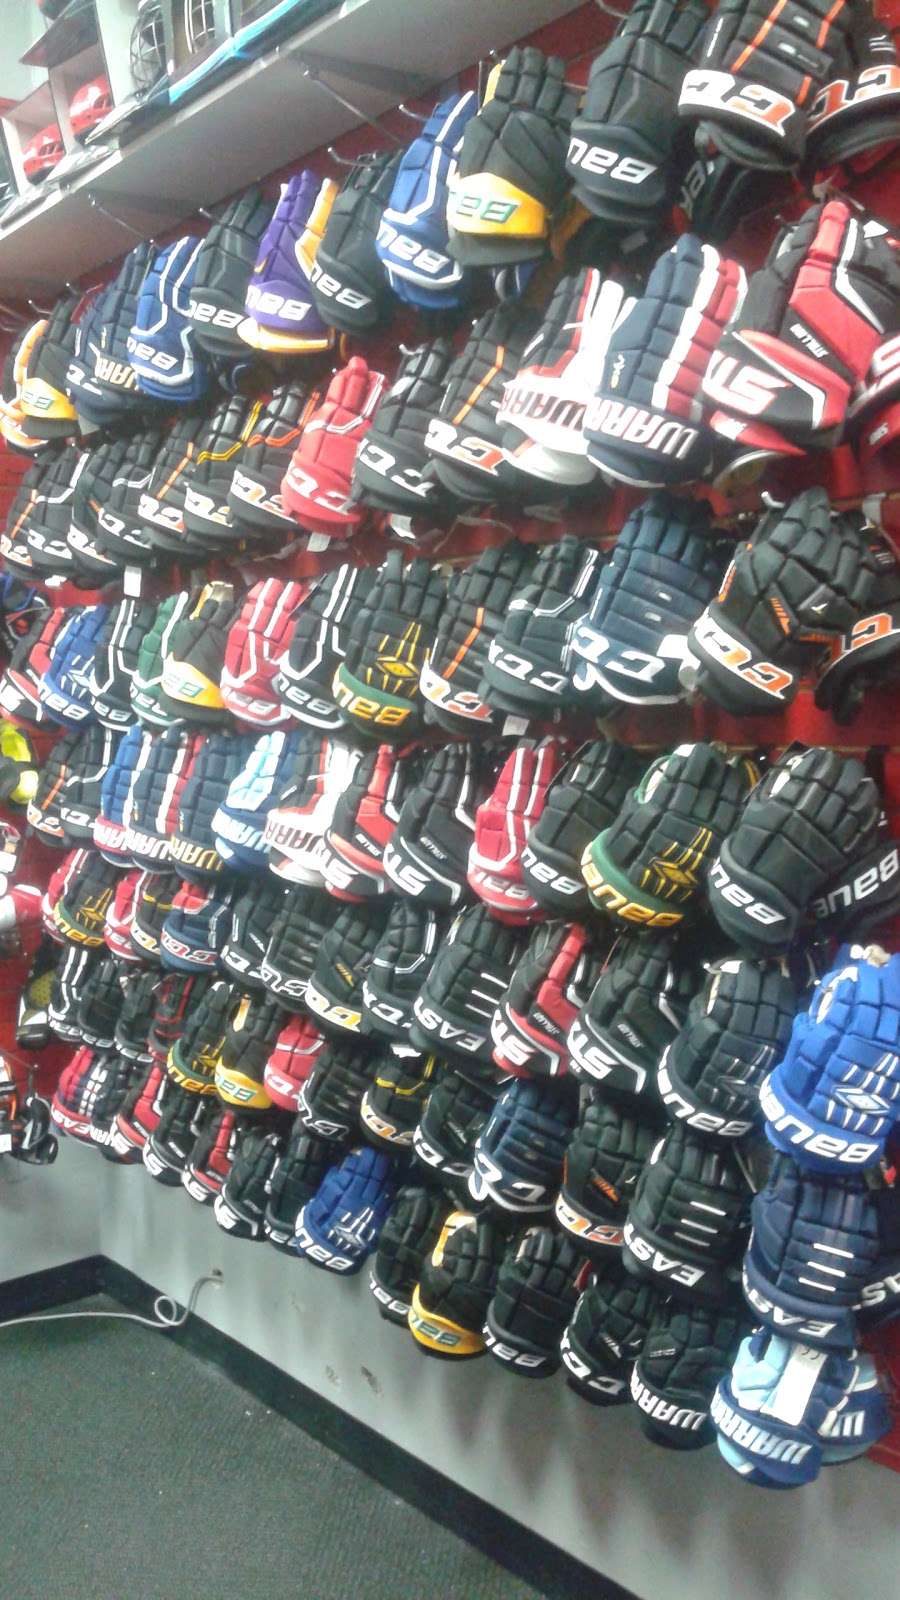 xHockeyProducts Pro Shop | Pro Skate Arena, 1000 Cornwall Rd, Monmouth Junction, NJ 08852, USA | Phone: (732) 940-6400 ext. 21